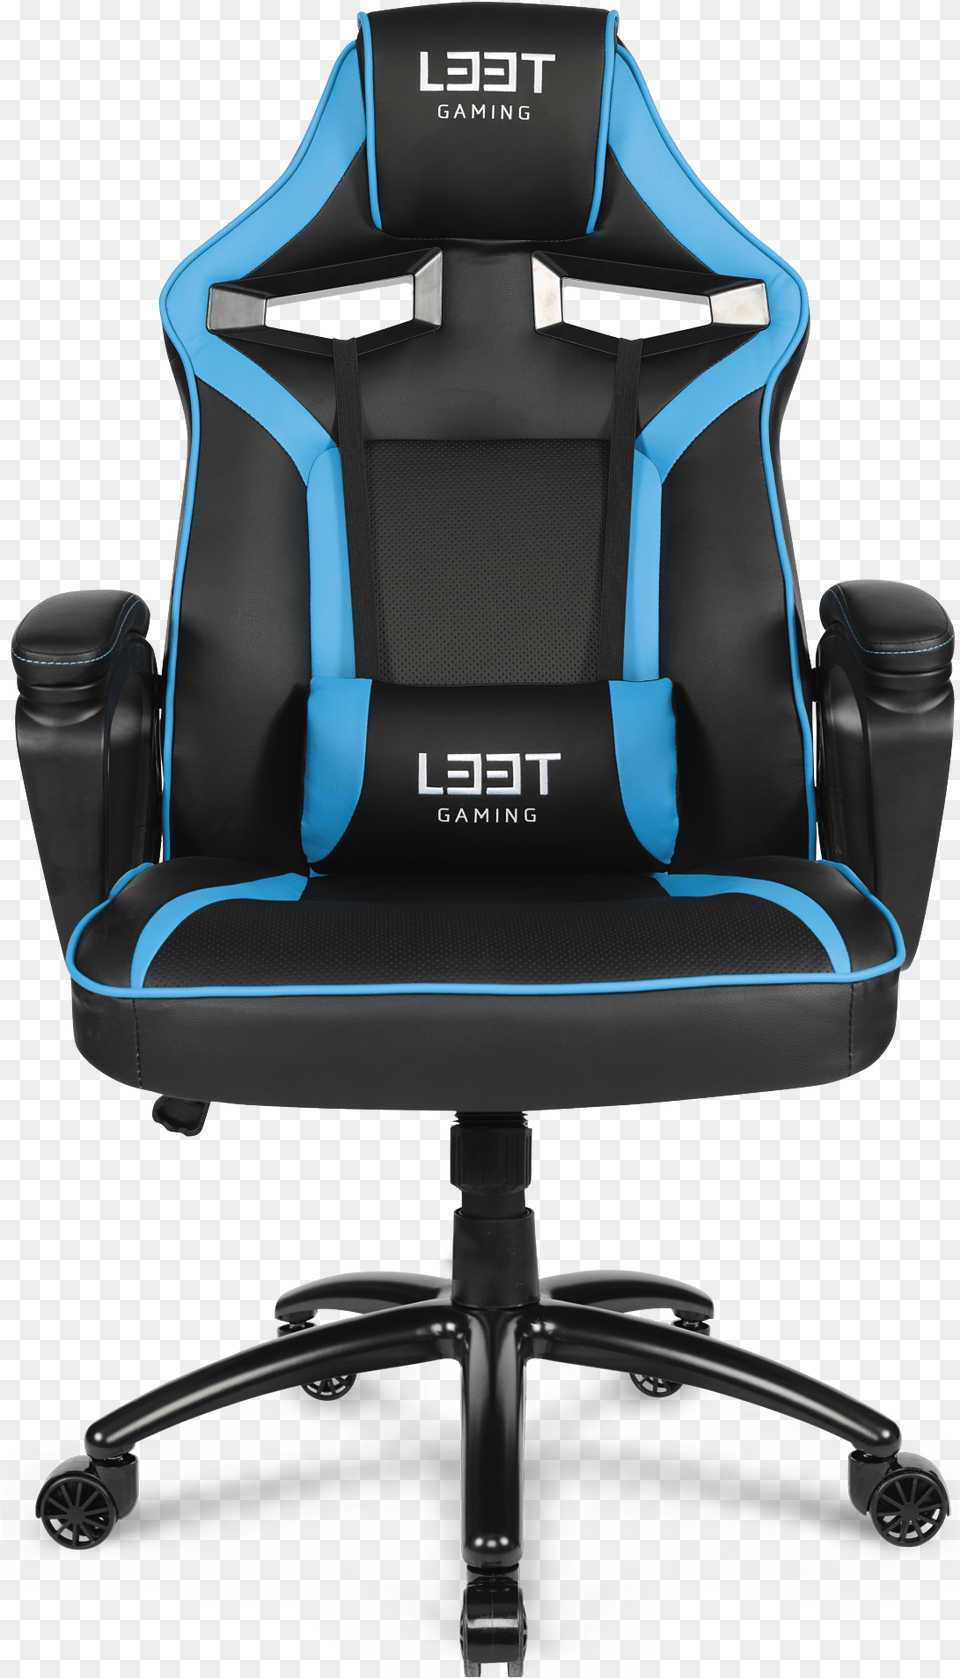 Extreme Blue L33t E Sport Pro Gaming Chair, Cushion, Home Decor, Furniture Png